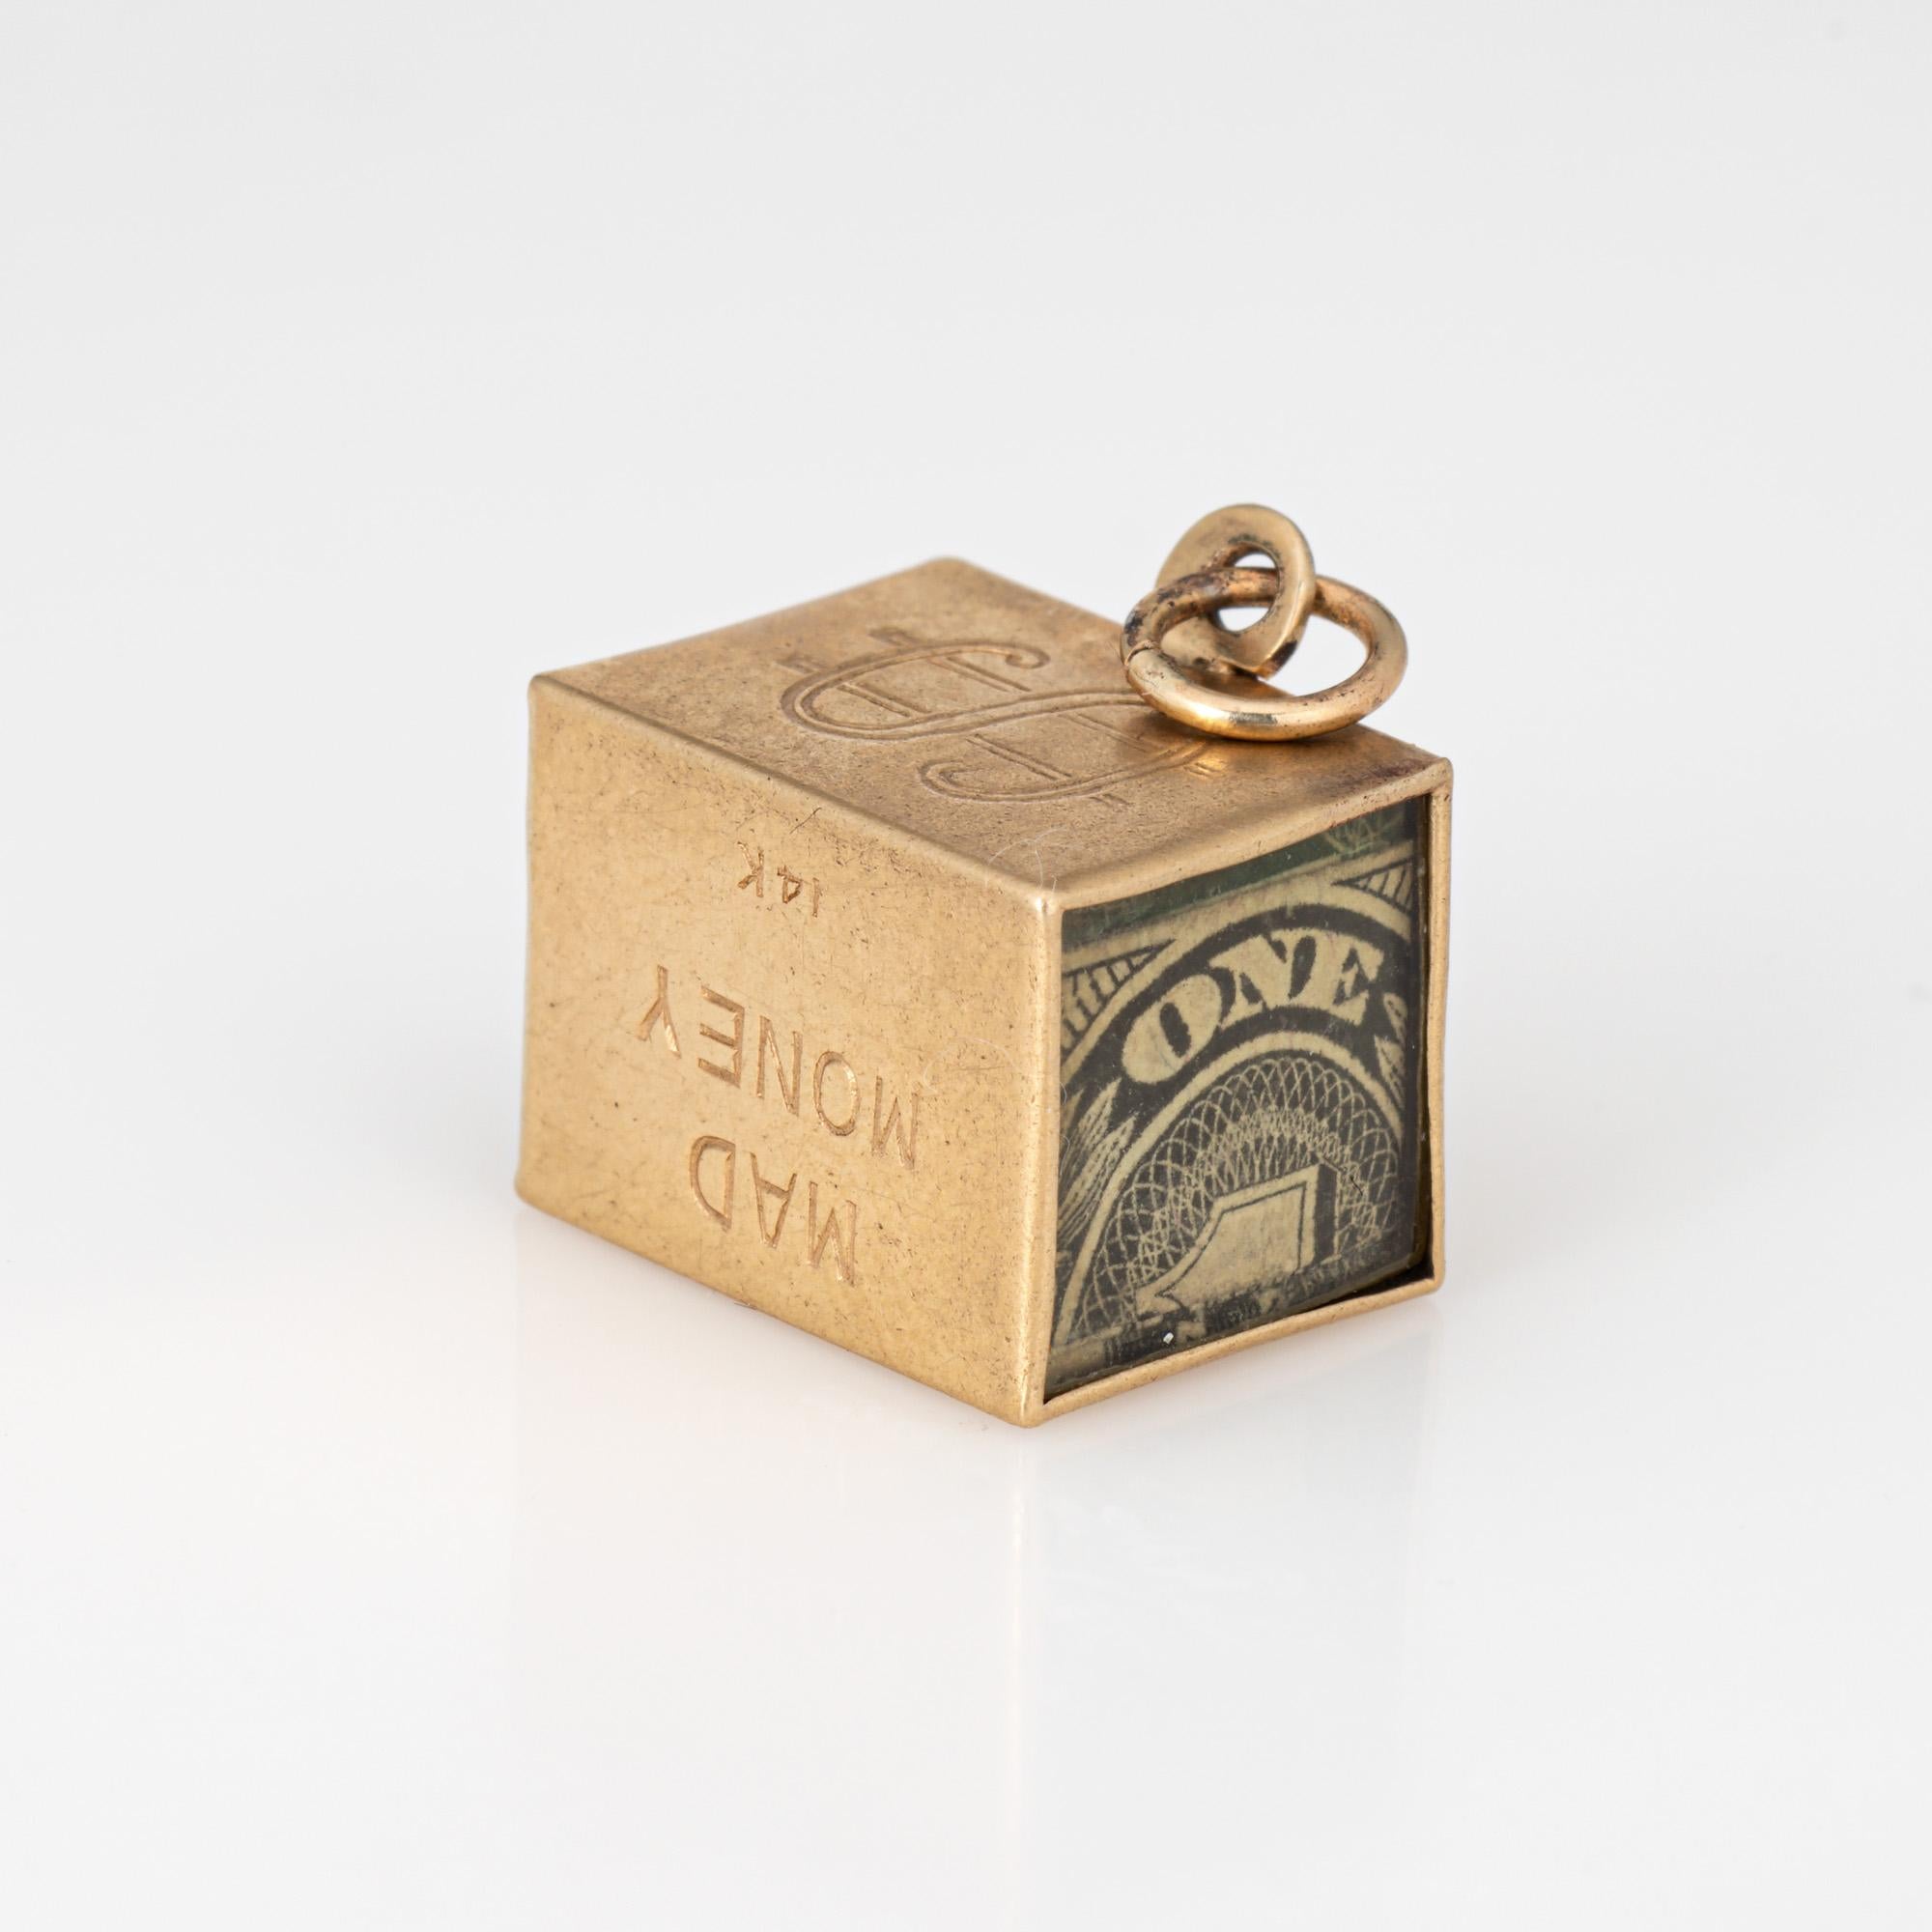 Fun vintage 'Mad Money' charm crafted in 14k yellow gold.  

The four sided charm features a dollar bill folded and placed in the center of the charm, with 